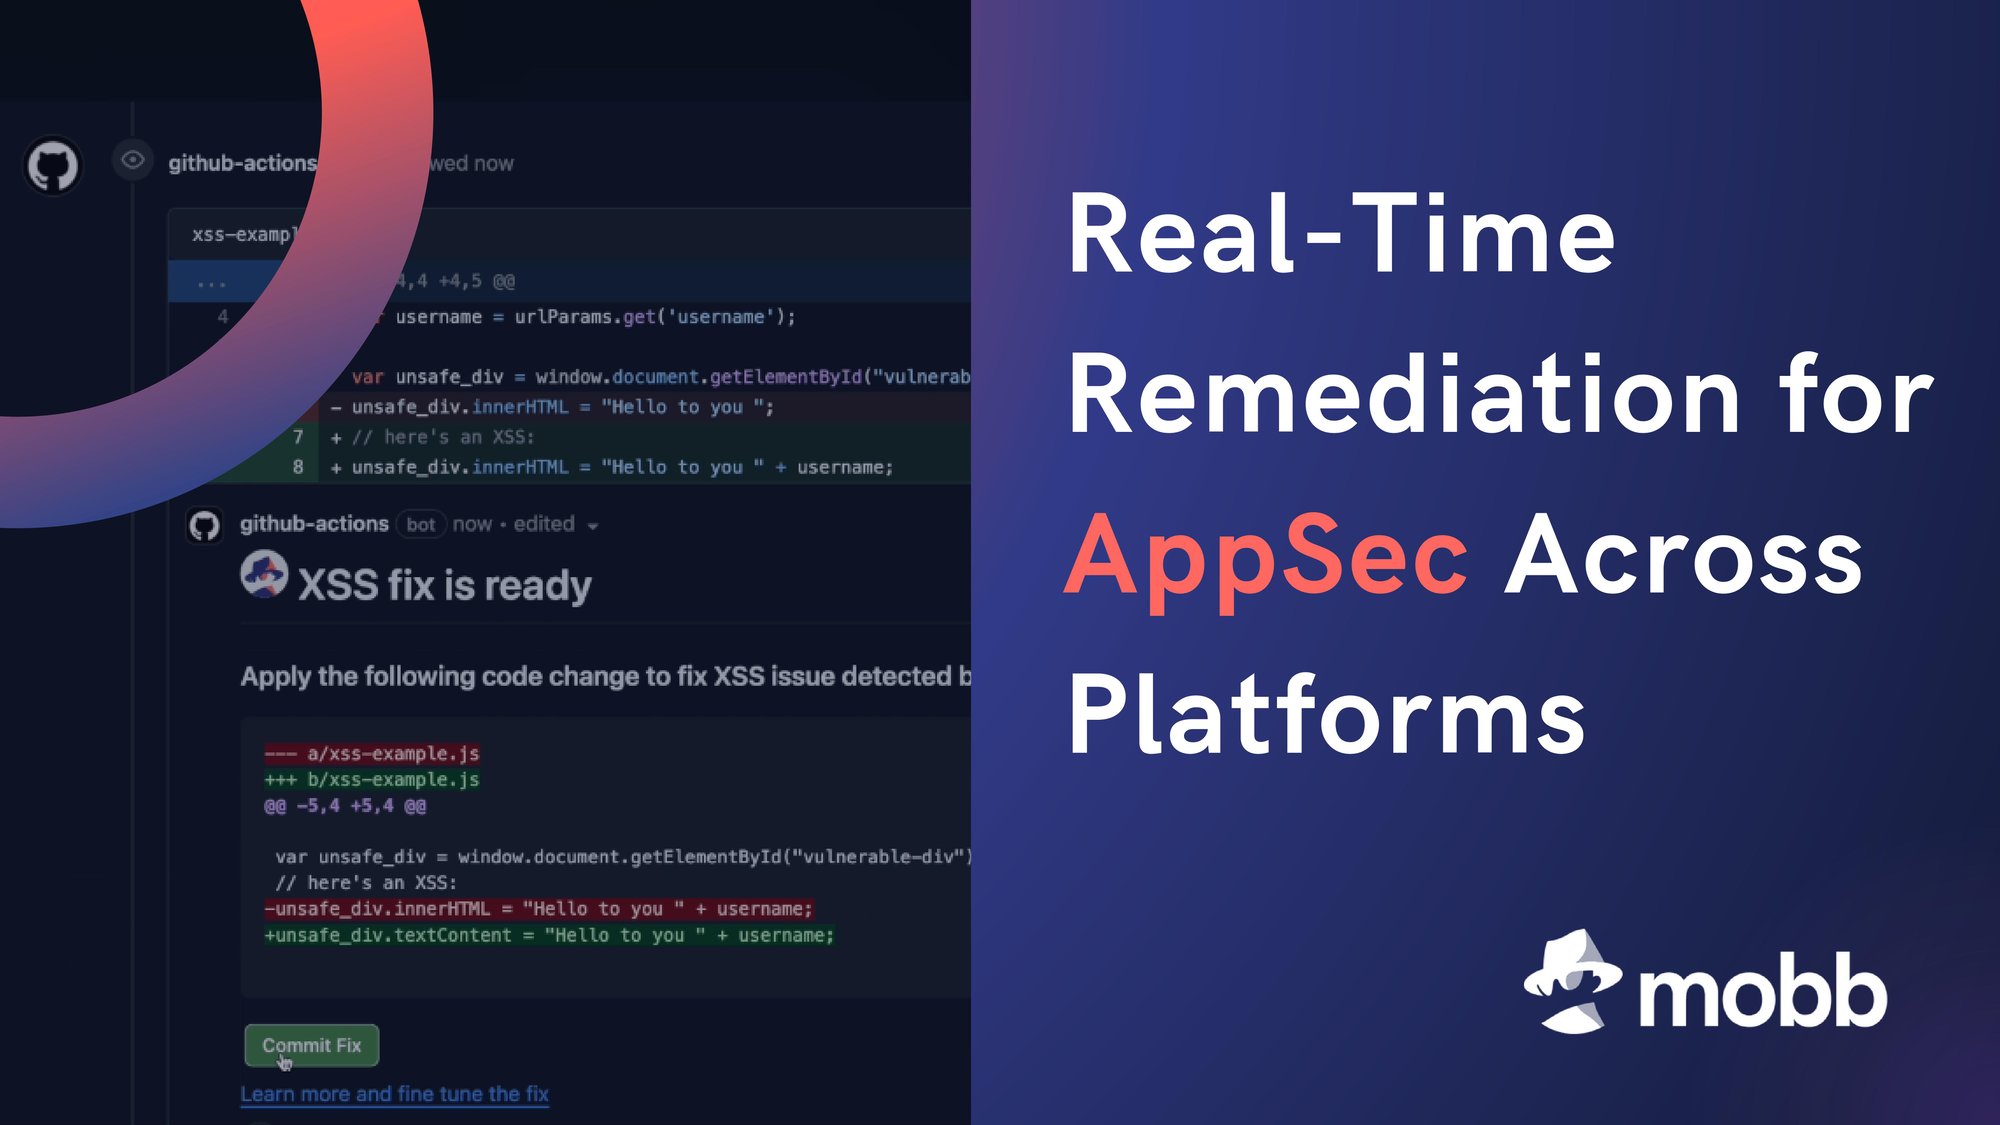 Real-Time Remediation for AppSec Across Platfroms